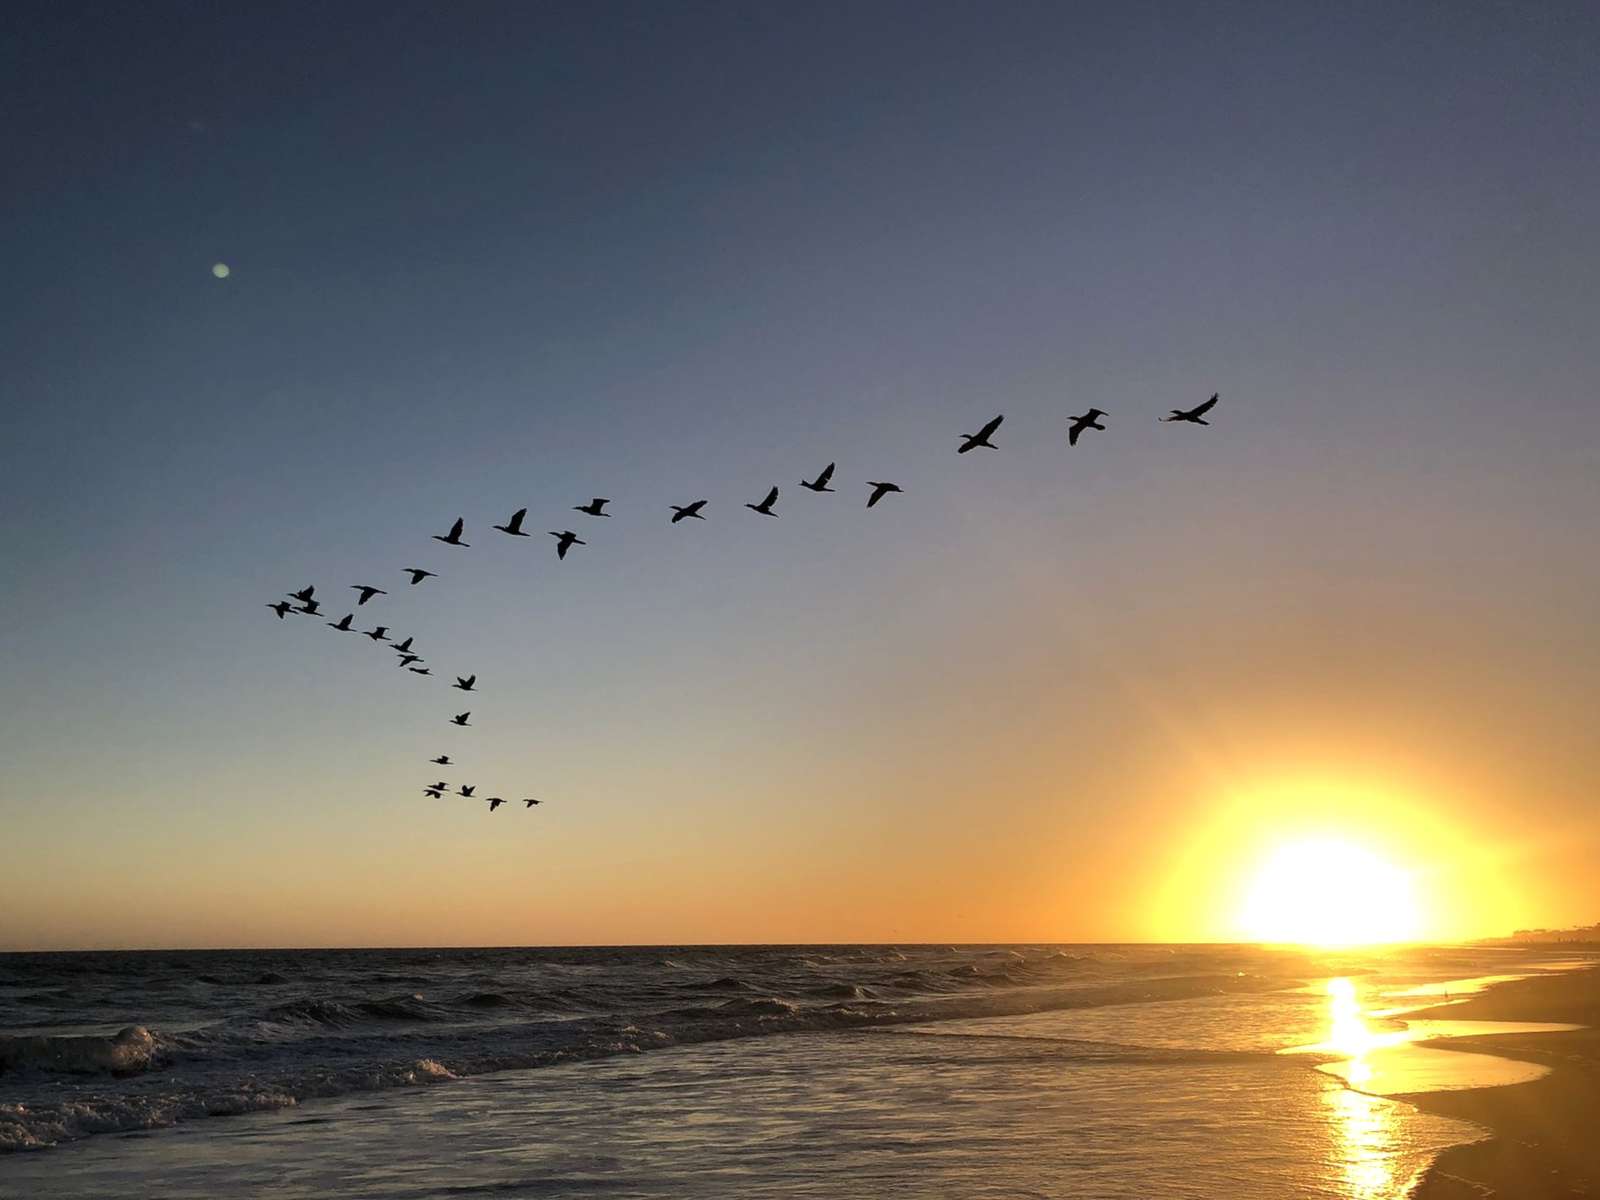 Sunset and flock of birds online puzzle